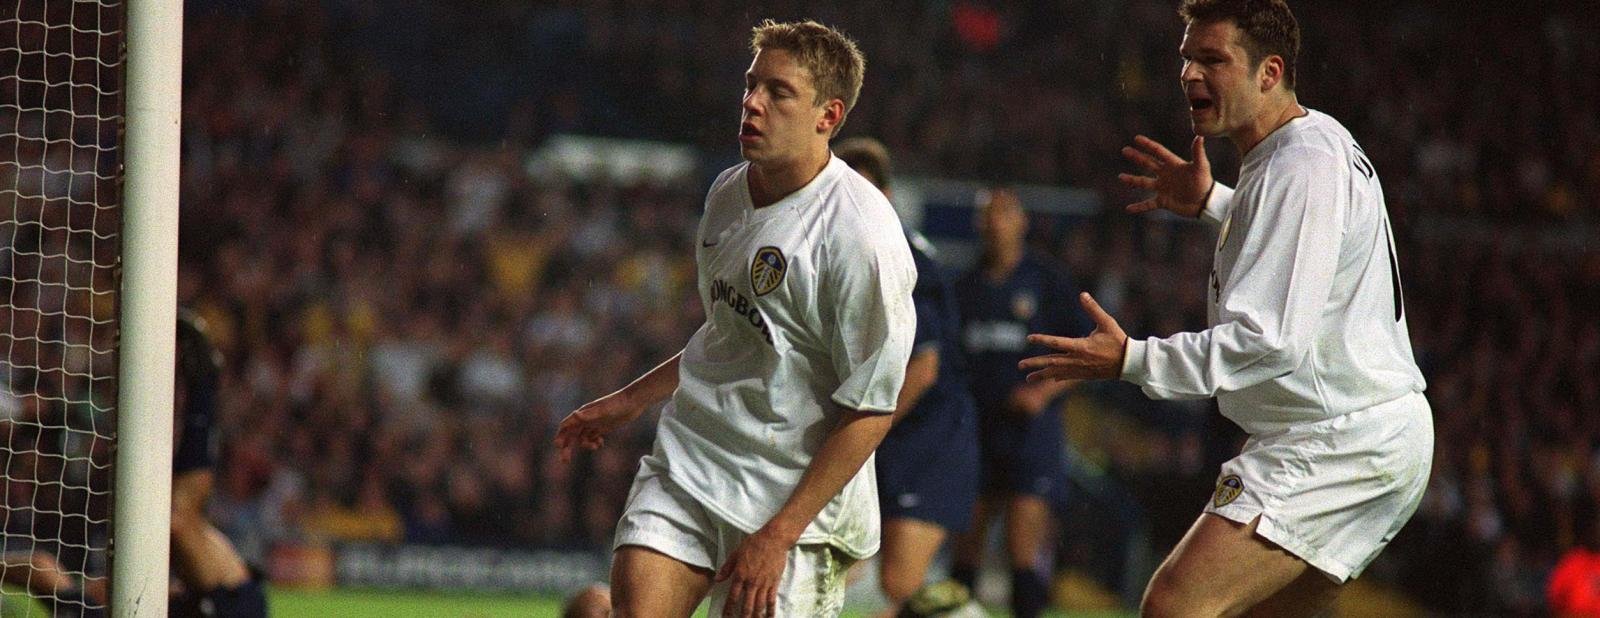 Leeds United’s stars of 2000/01: Where are they now?